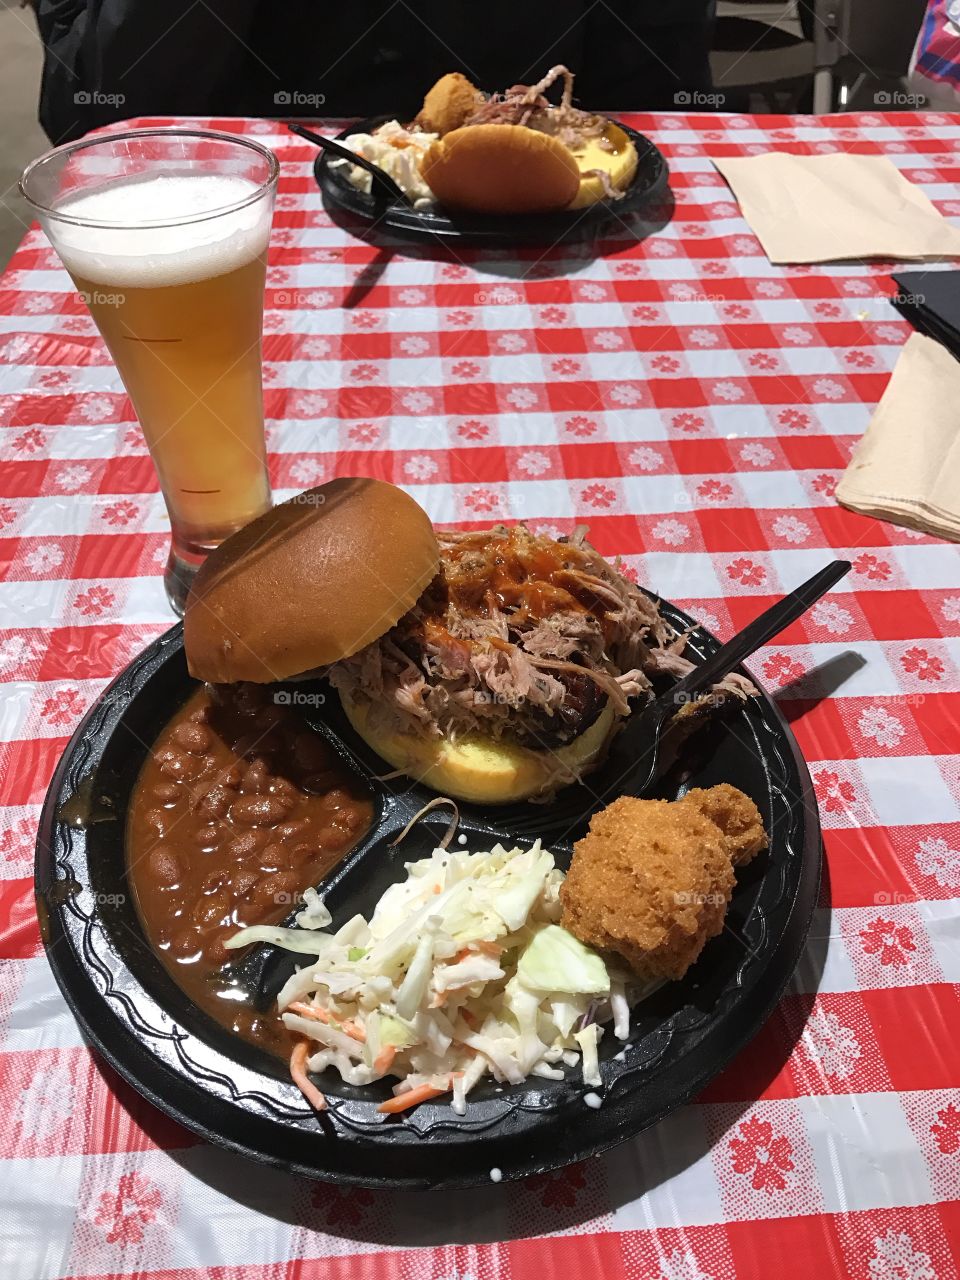 You’re perfect. Pulled pork, baked beans, coleslaw, hush puppy, and a beer. Delicious.